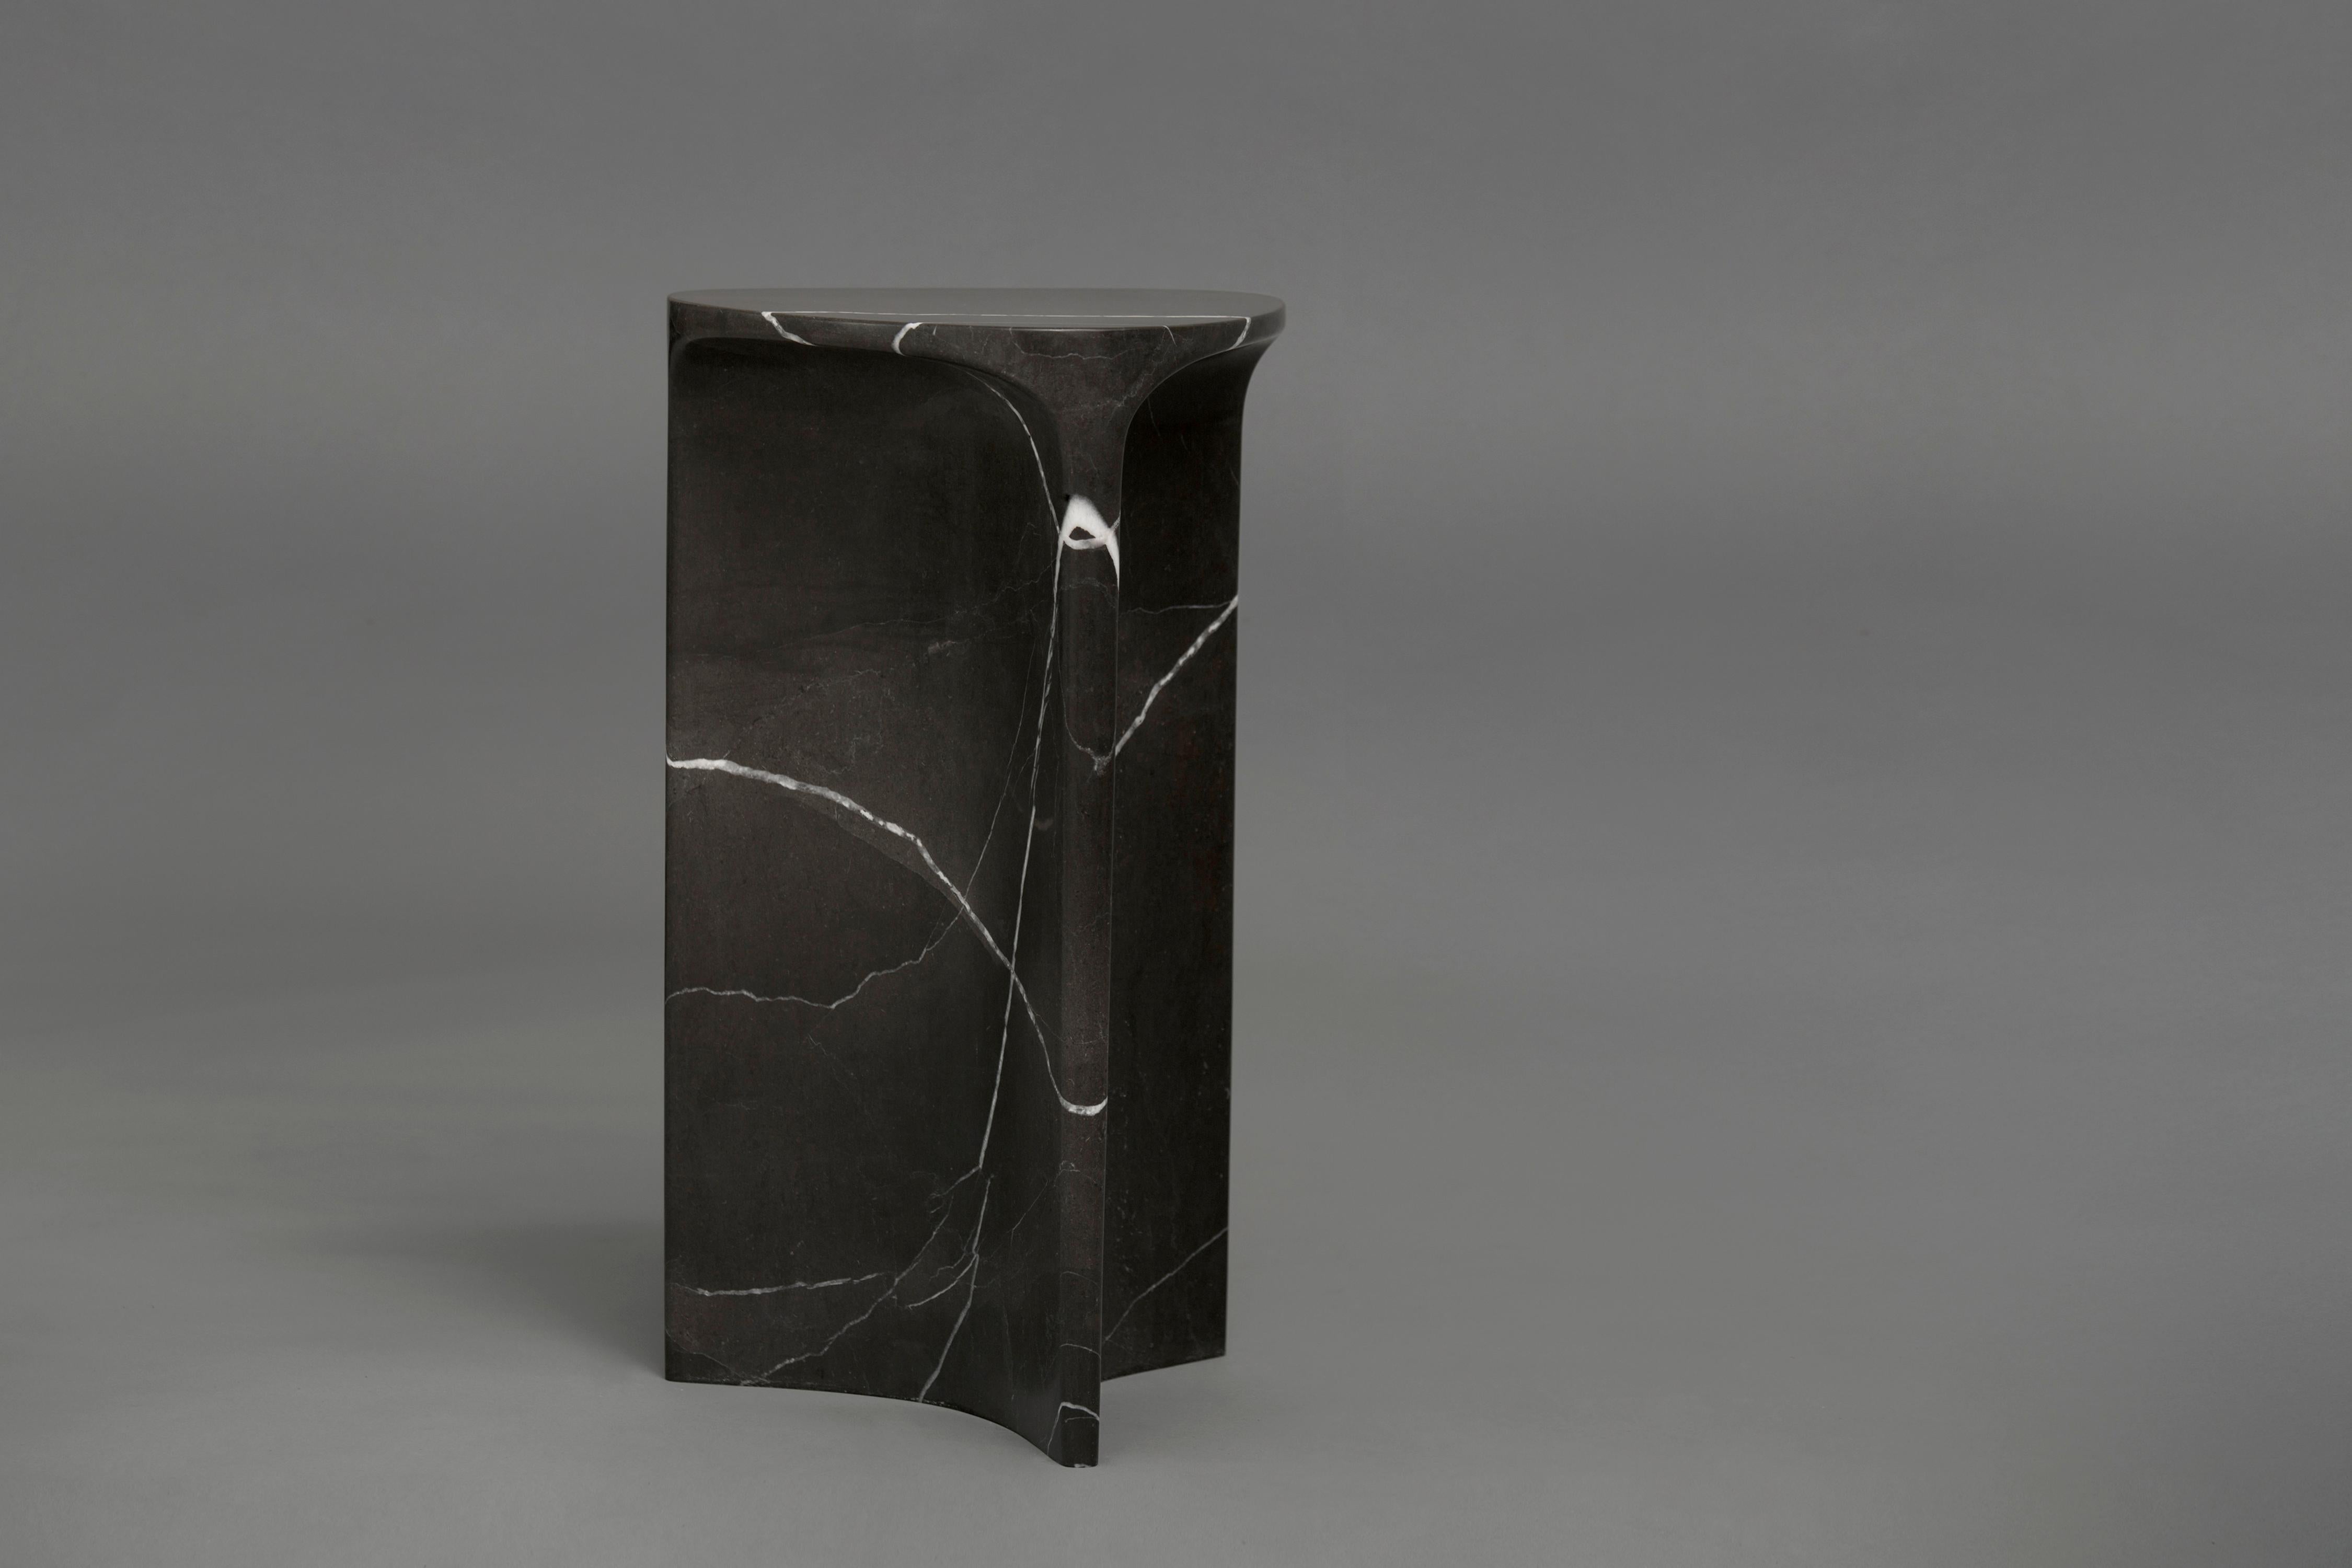 Carv occasional table is Cut from a single block of Nero Marquina marble.
Essential and organic design, naturally creating a flat tabletop flowing
to a Y - shaped foot, revealing the stone’s veins
from the exterior surface through to it’s